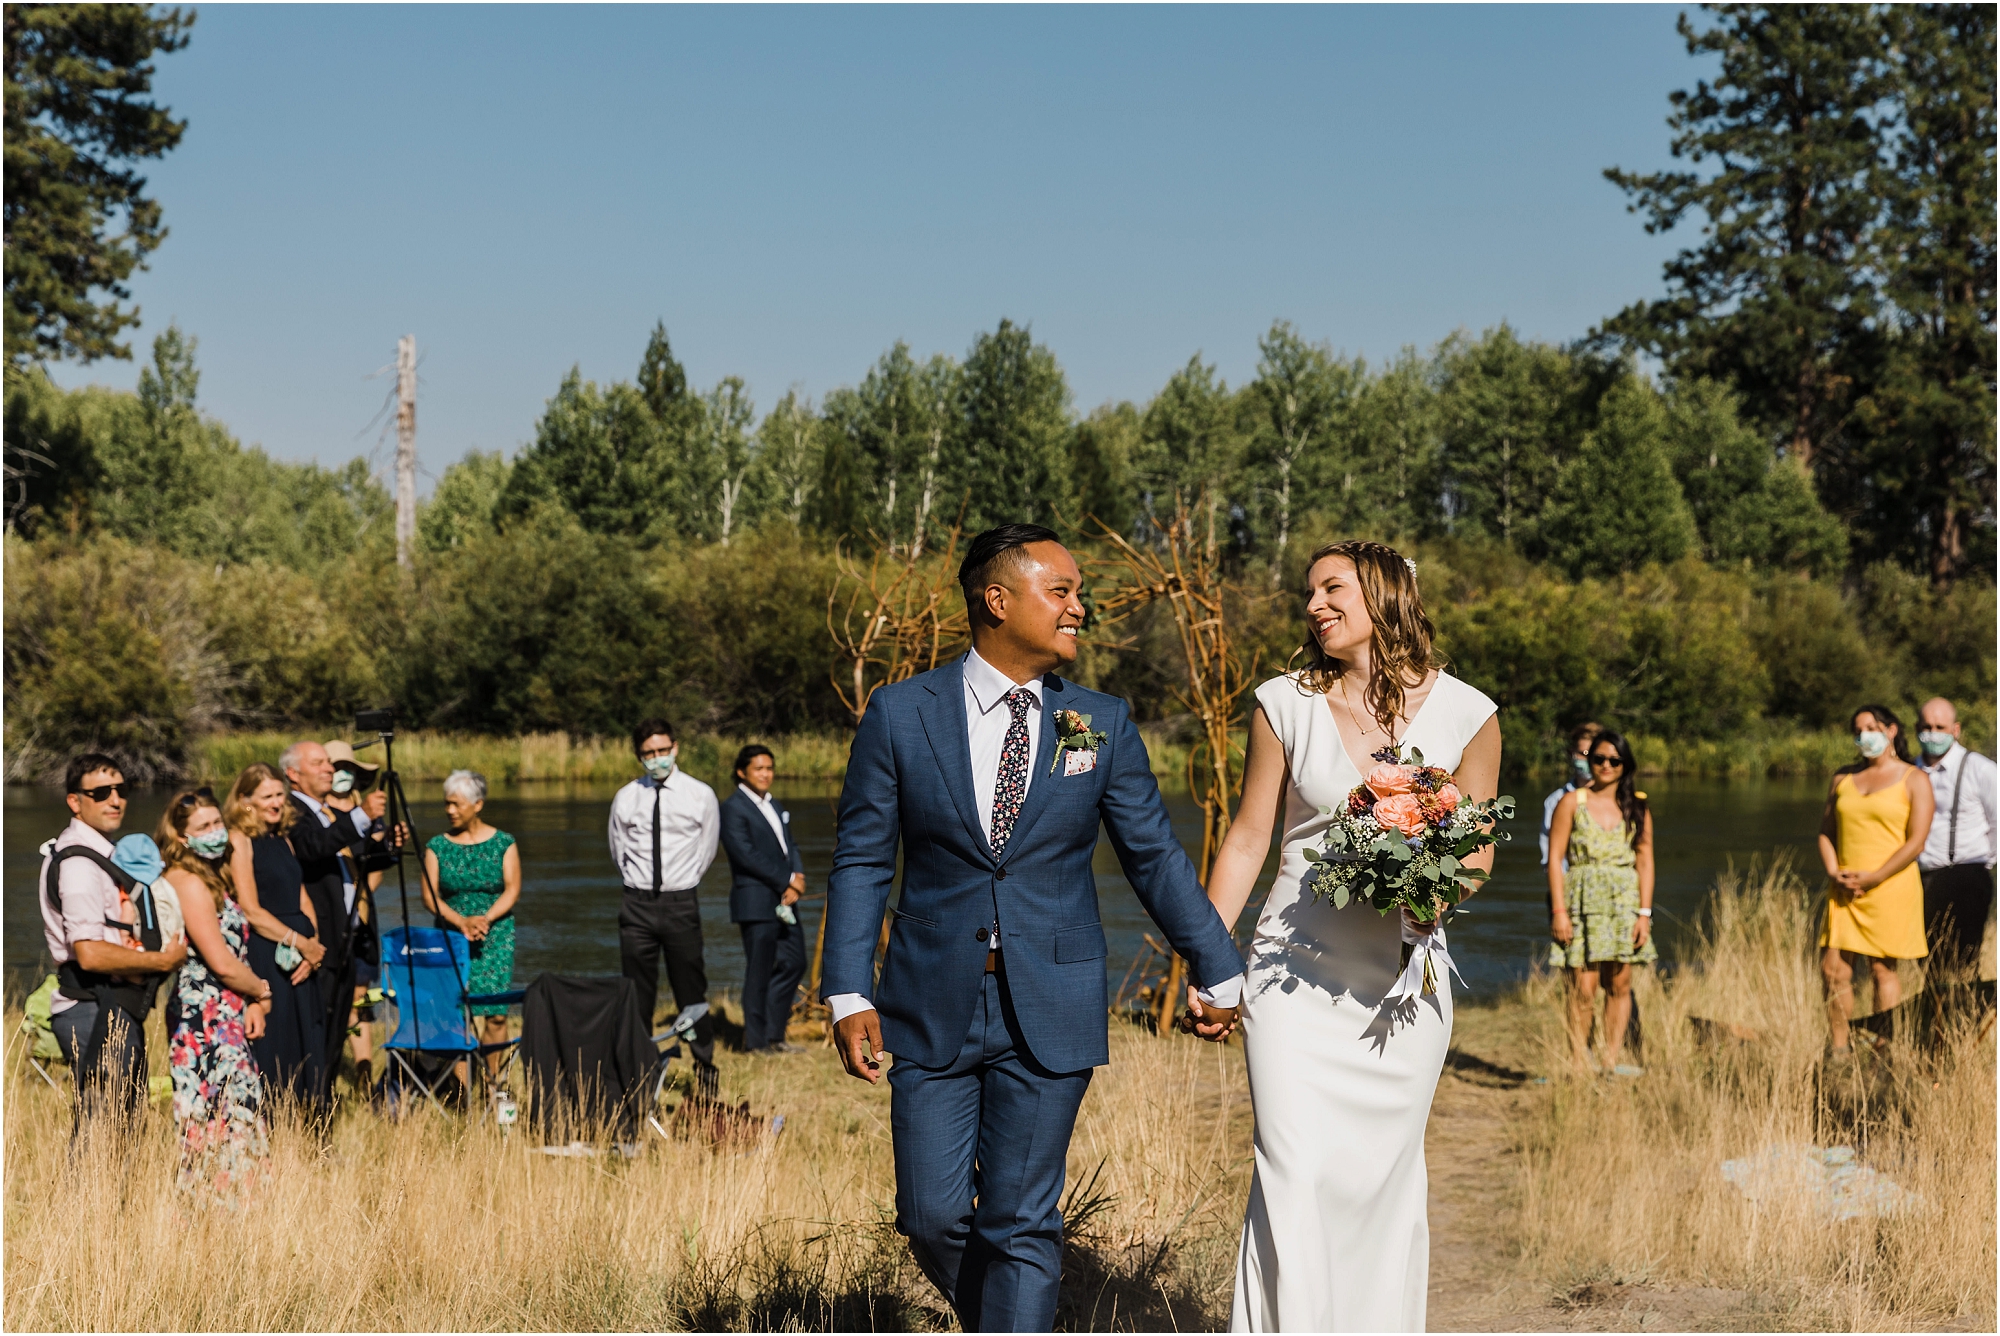 A newly married couple walks hand in hand as their wedding guests stand behind them on the edge of the river bank after their small elopement ceremony in Bend, Oregon. | Erica Swantek Photography